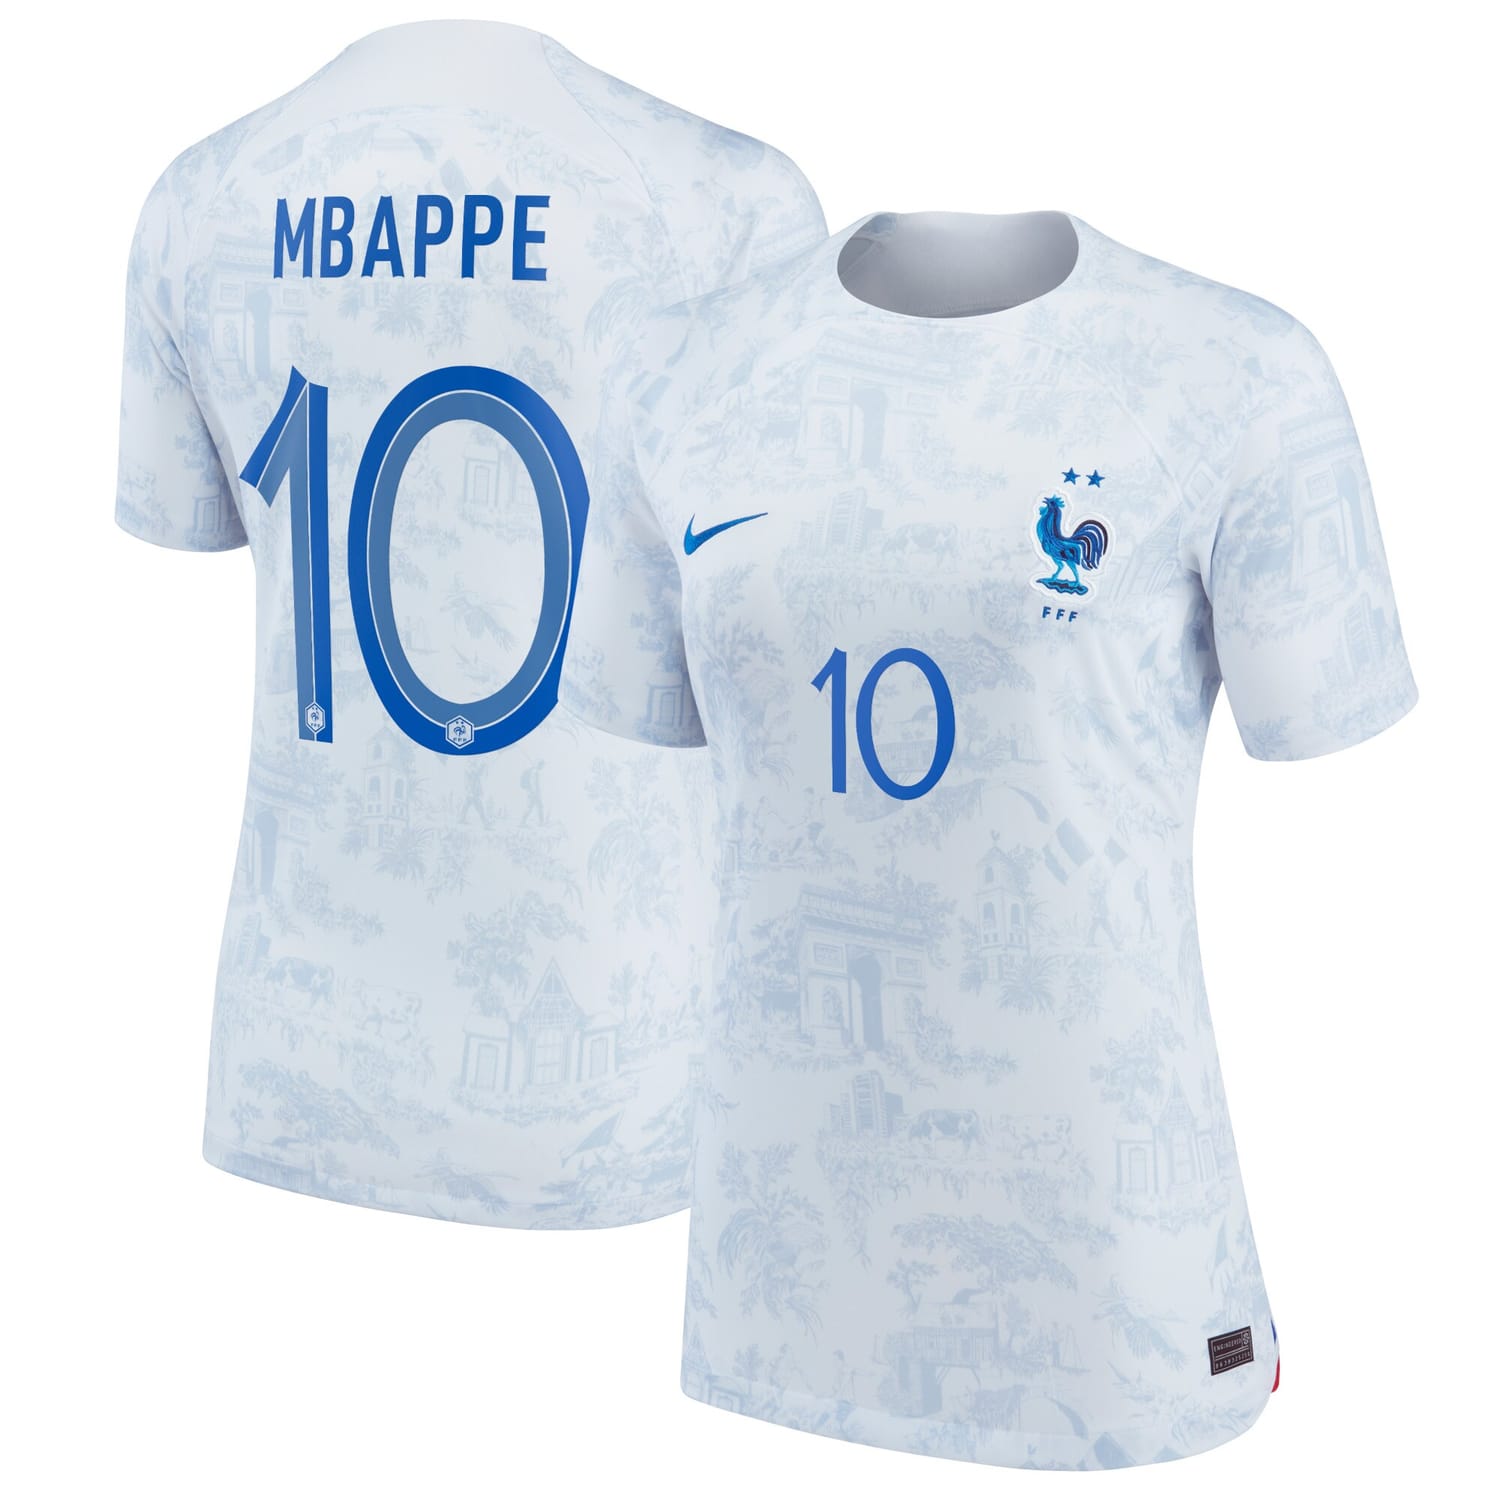 France National Team Away Jersey Shirt 2022 player Kylian Mbappe printing for Women